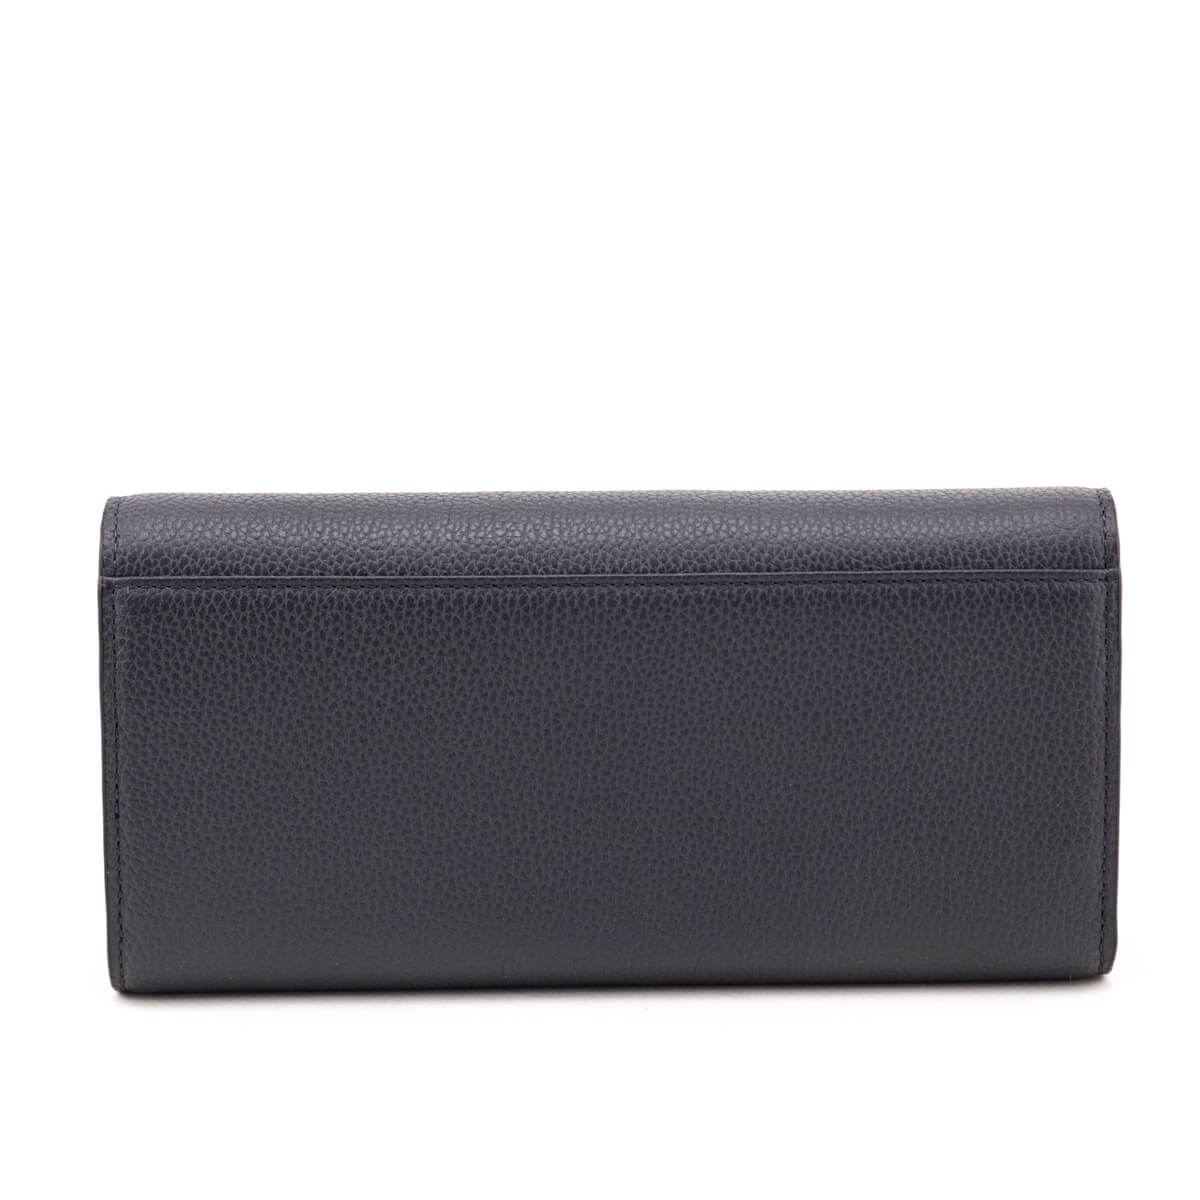 MCM Black Grained Leather Continental Wallet - Love that Bag etc - Preowned Authentic Designer Handbags & Preloved Fashions